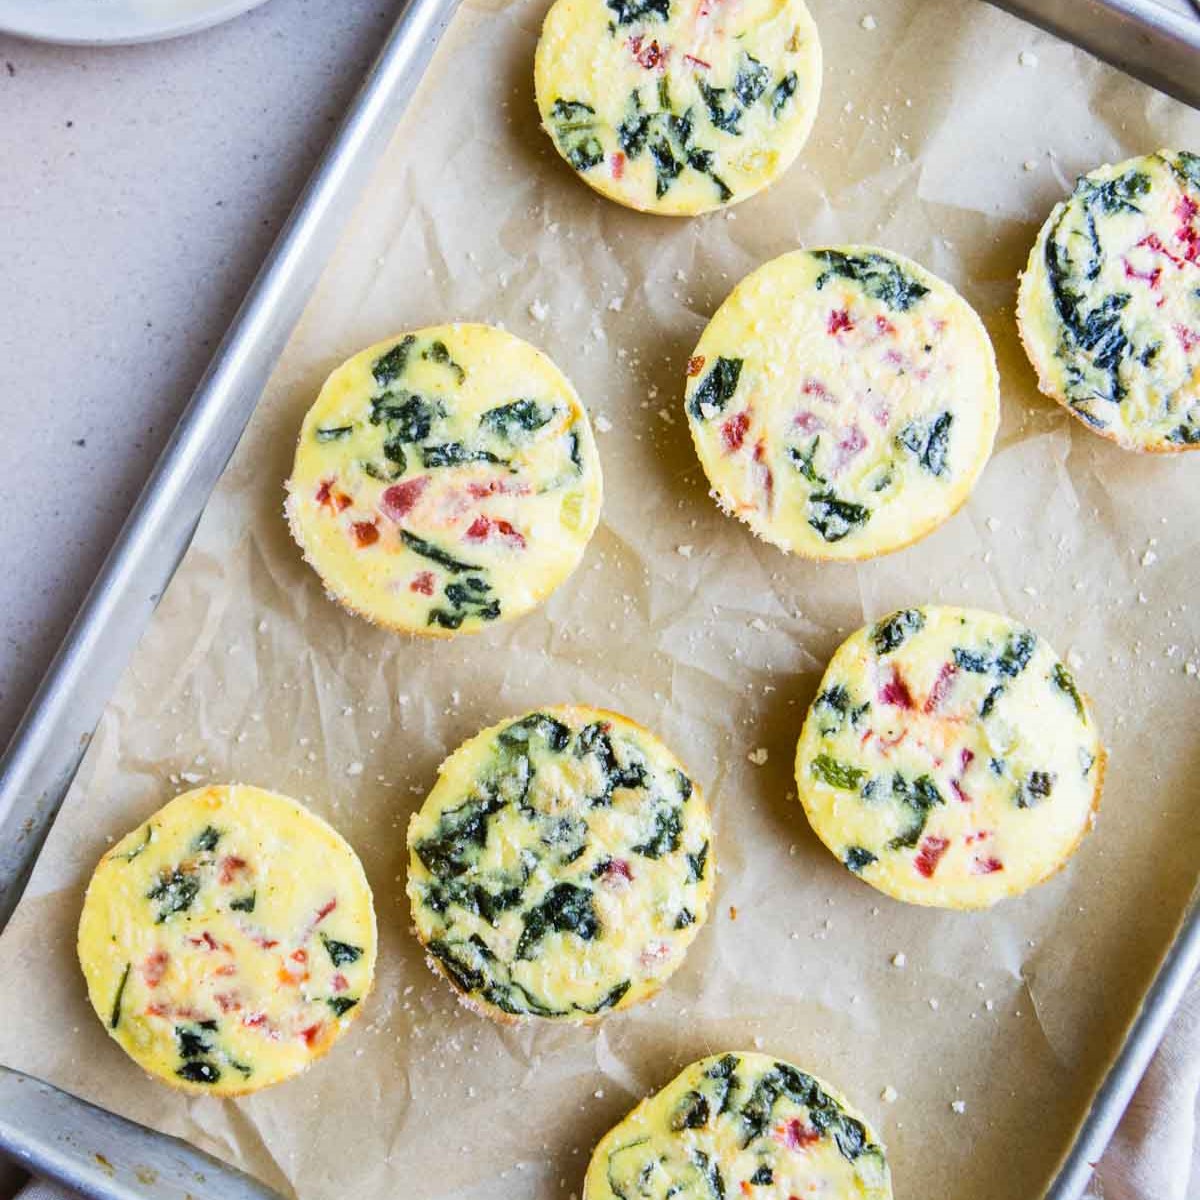 Baking dish with colorful, veggie filled egg bites laying on parchment paper.